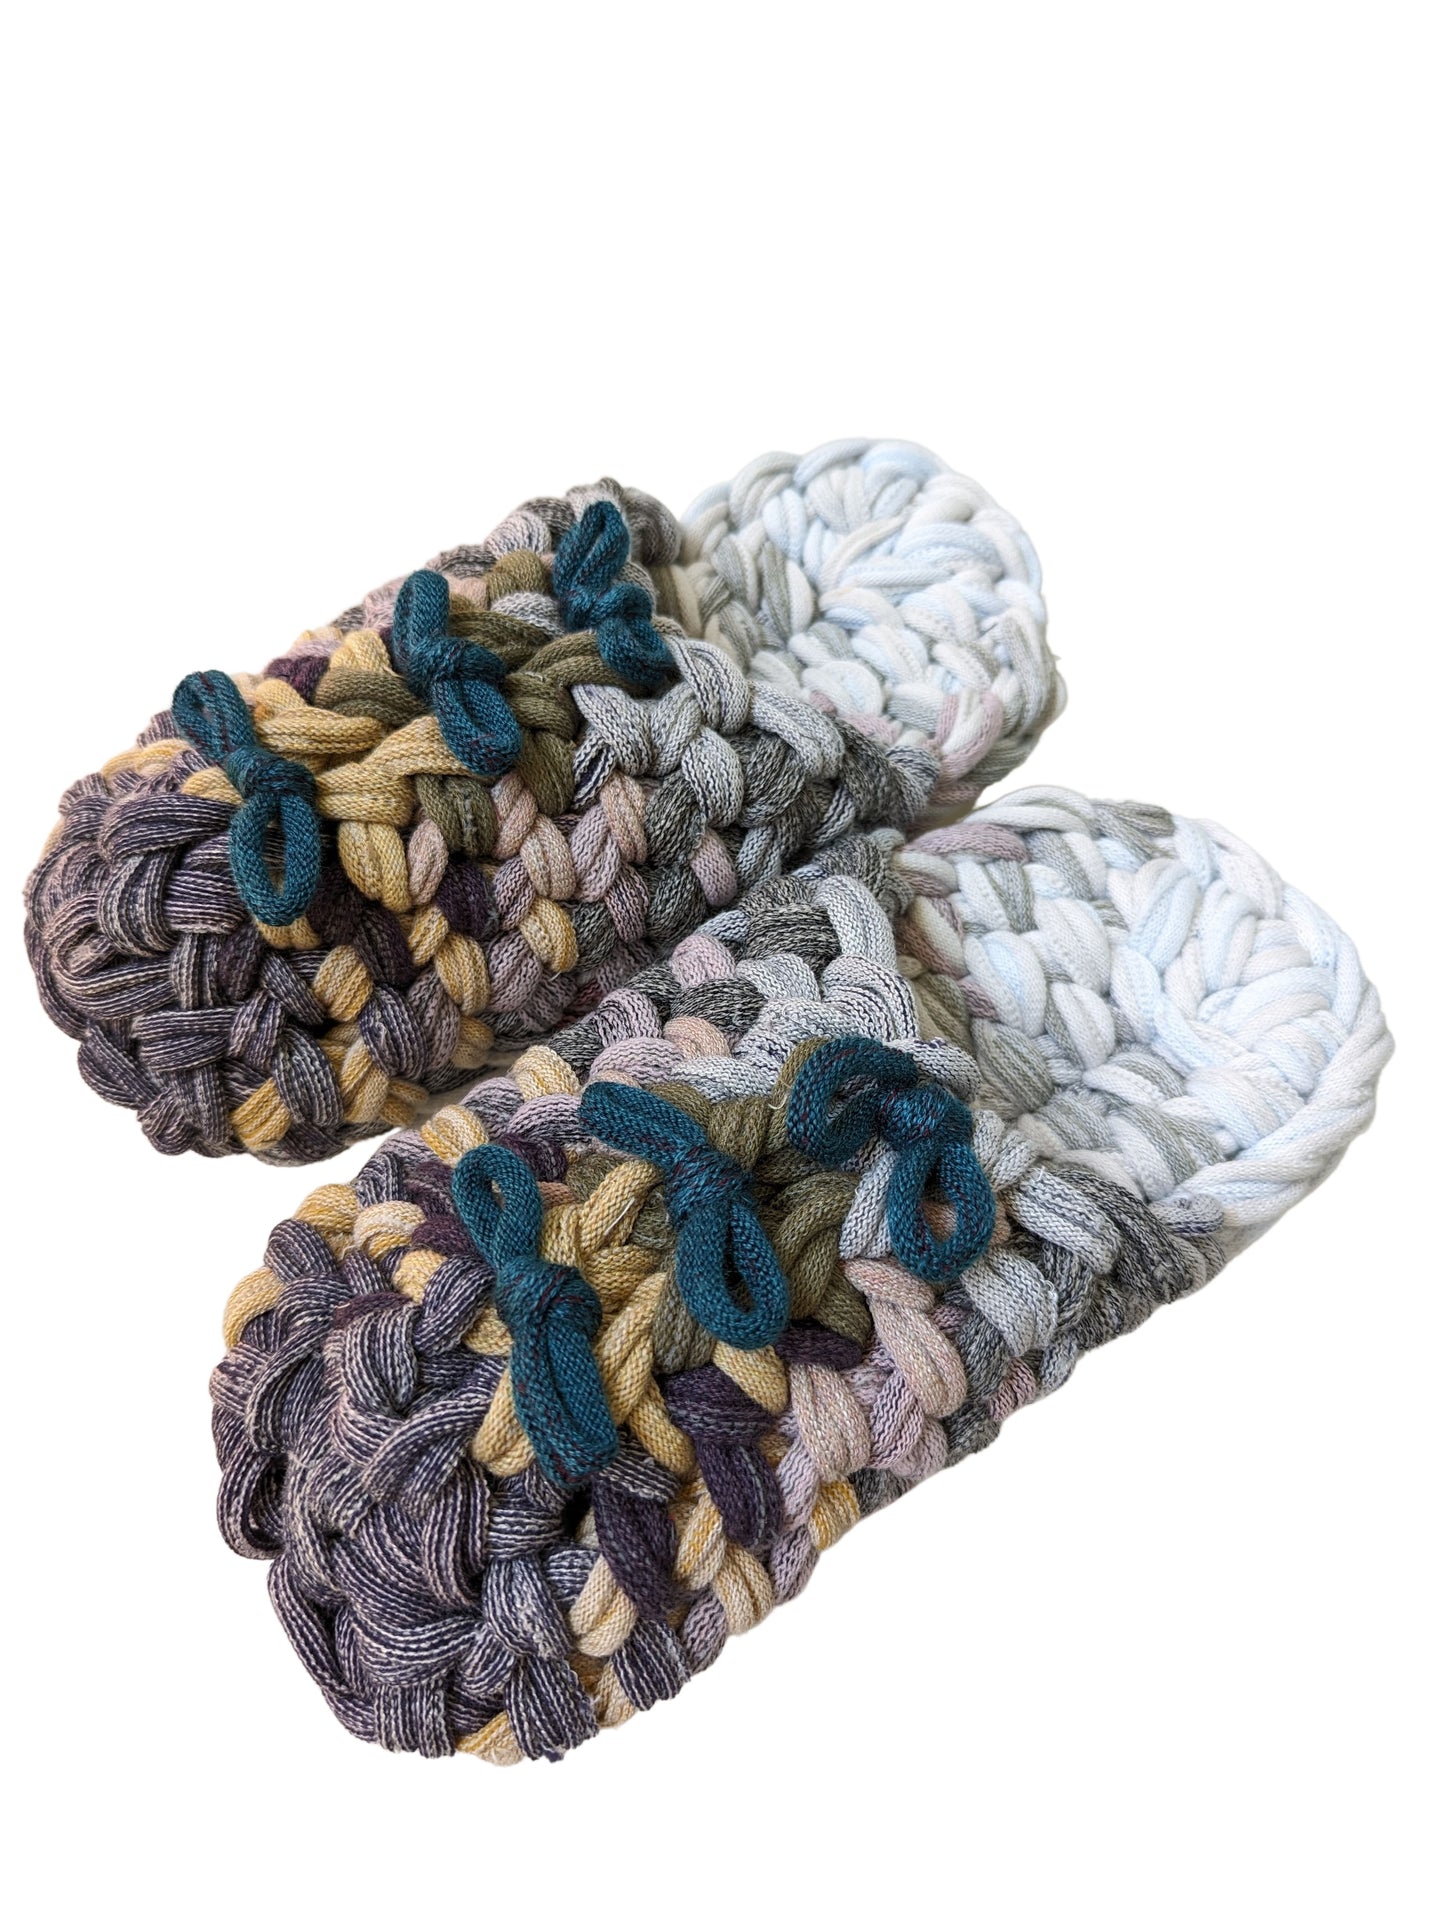 Large | Knit up-cycle slippers 2023-L20 [Large]